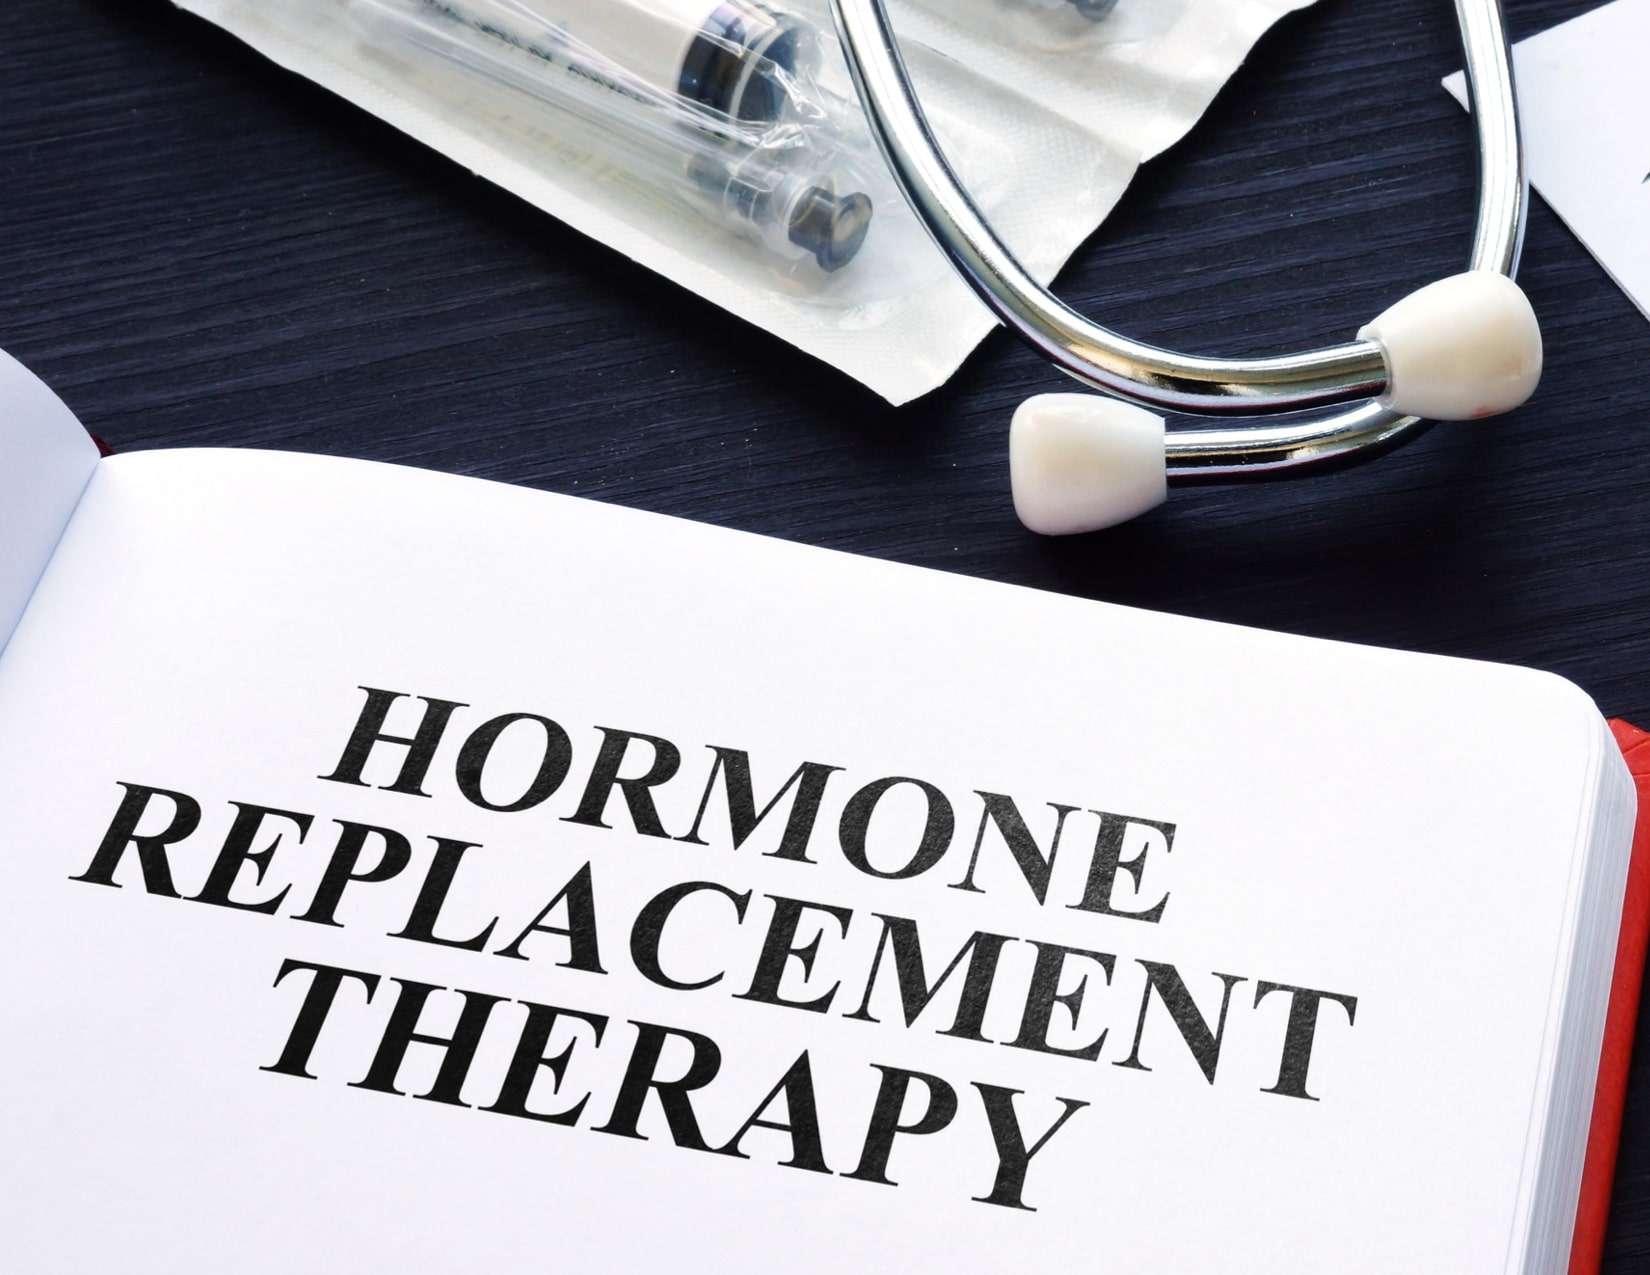 5 Benefits of Hormone Replacement Therapy You Need to Know